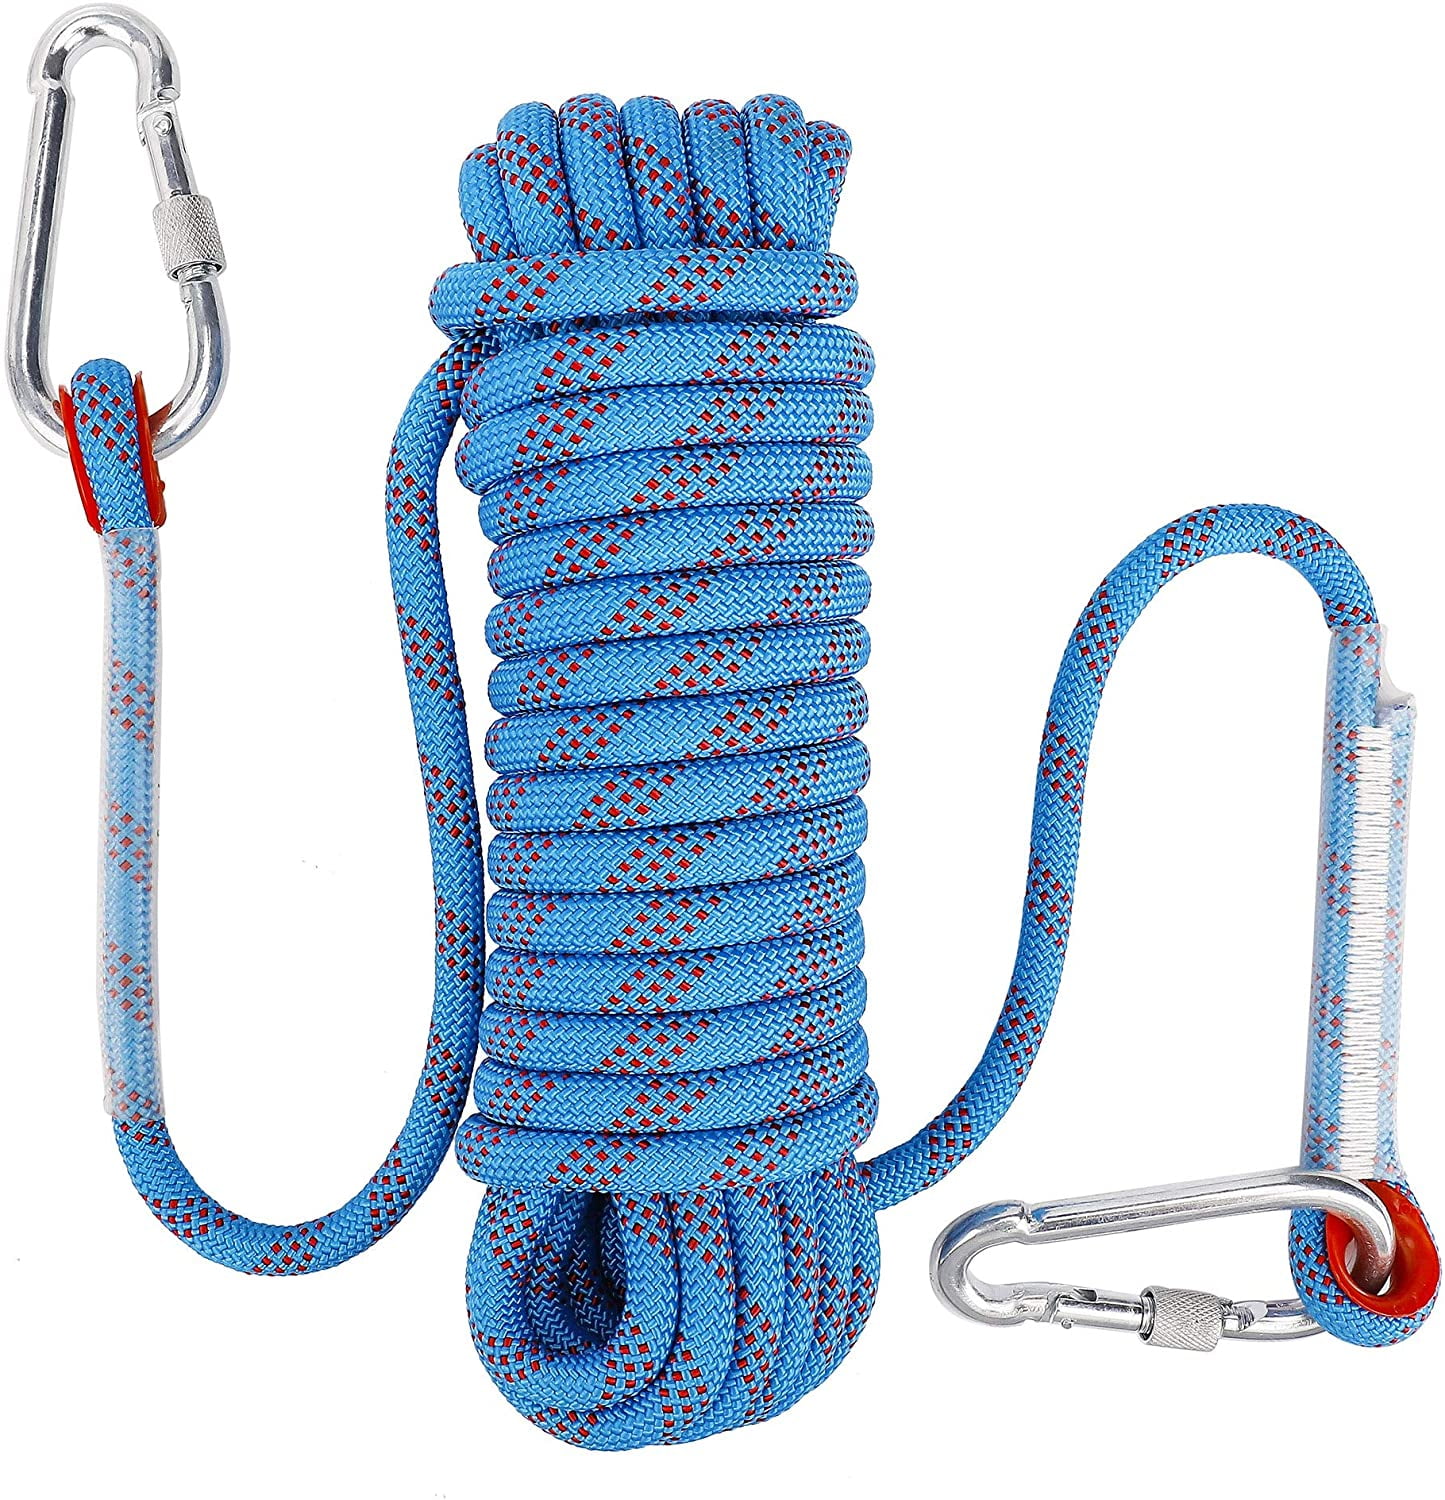 Outdoor Static Rock Rescue Rope Rack Climbing Rope 10mm Diameter 64 feet Safety 